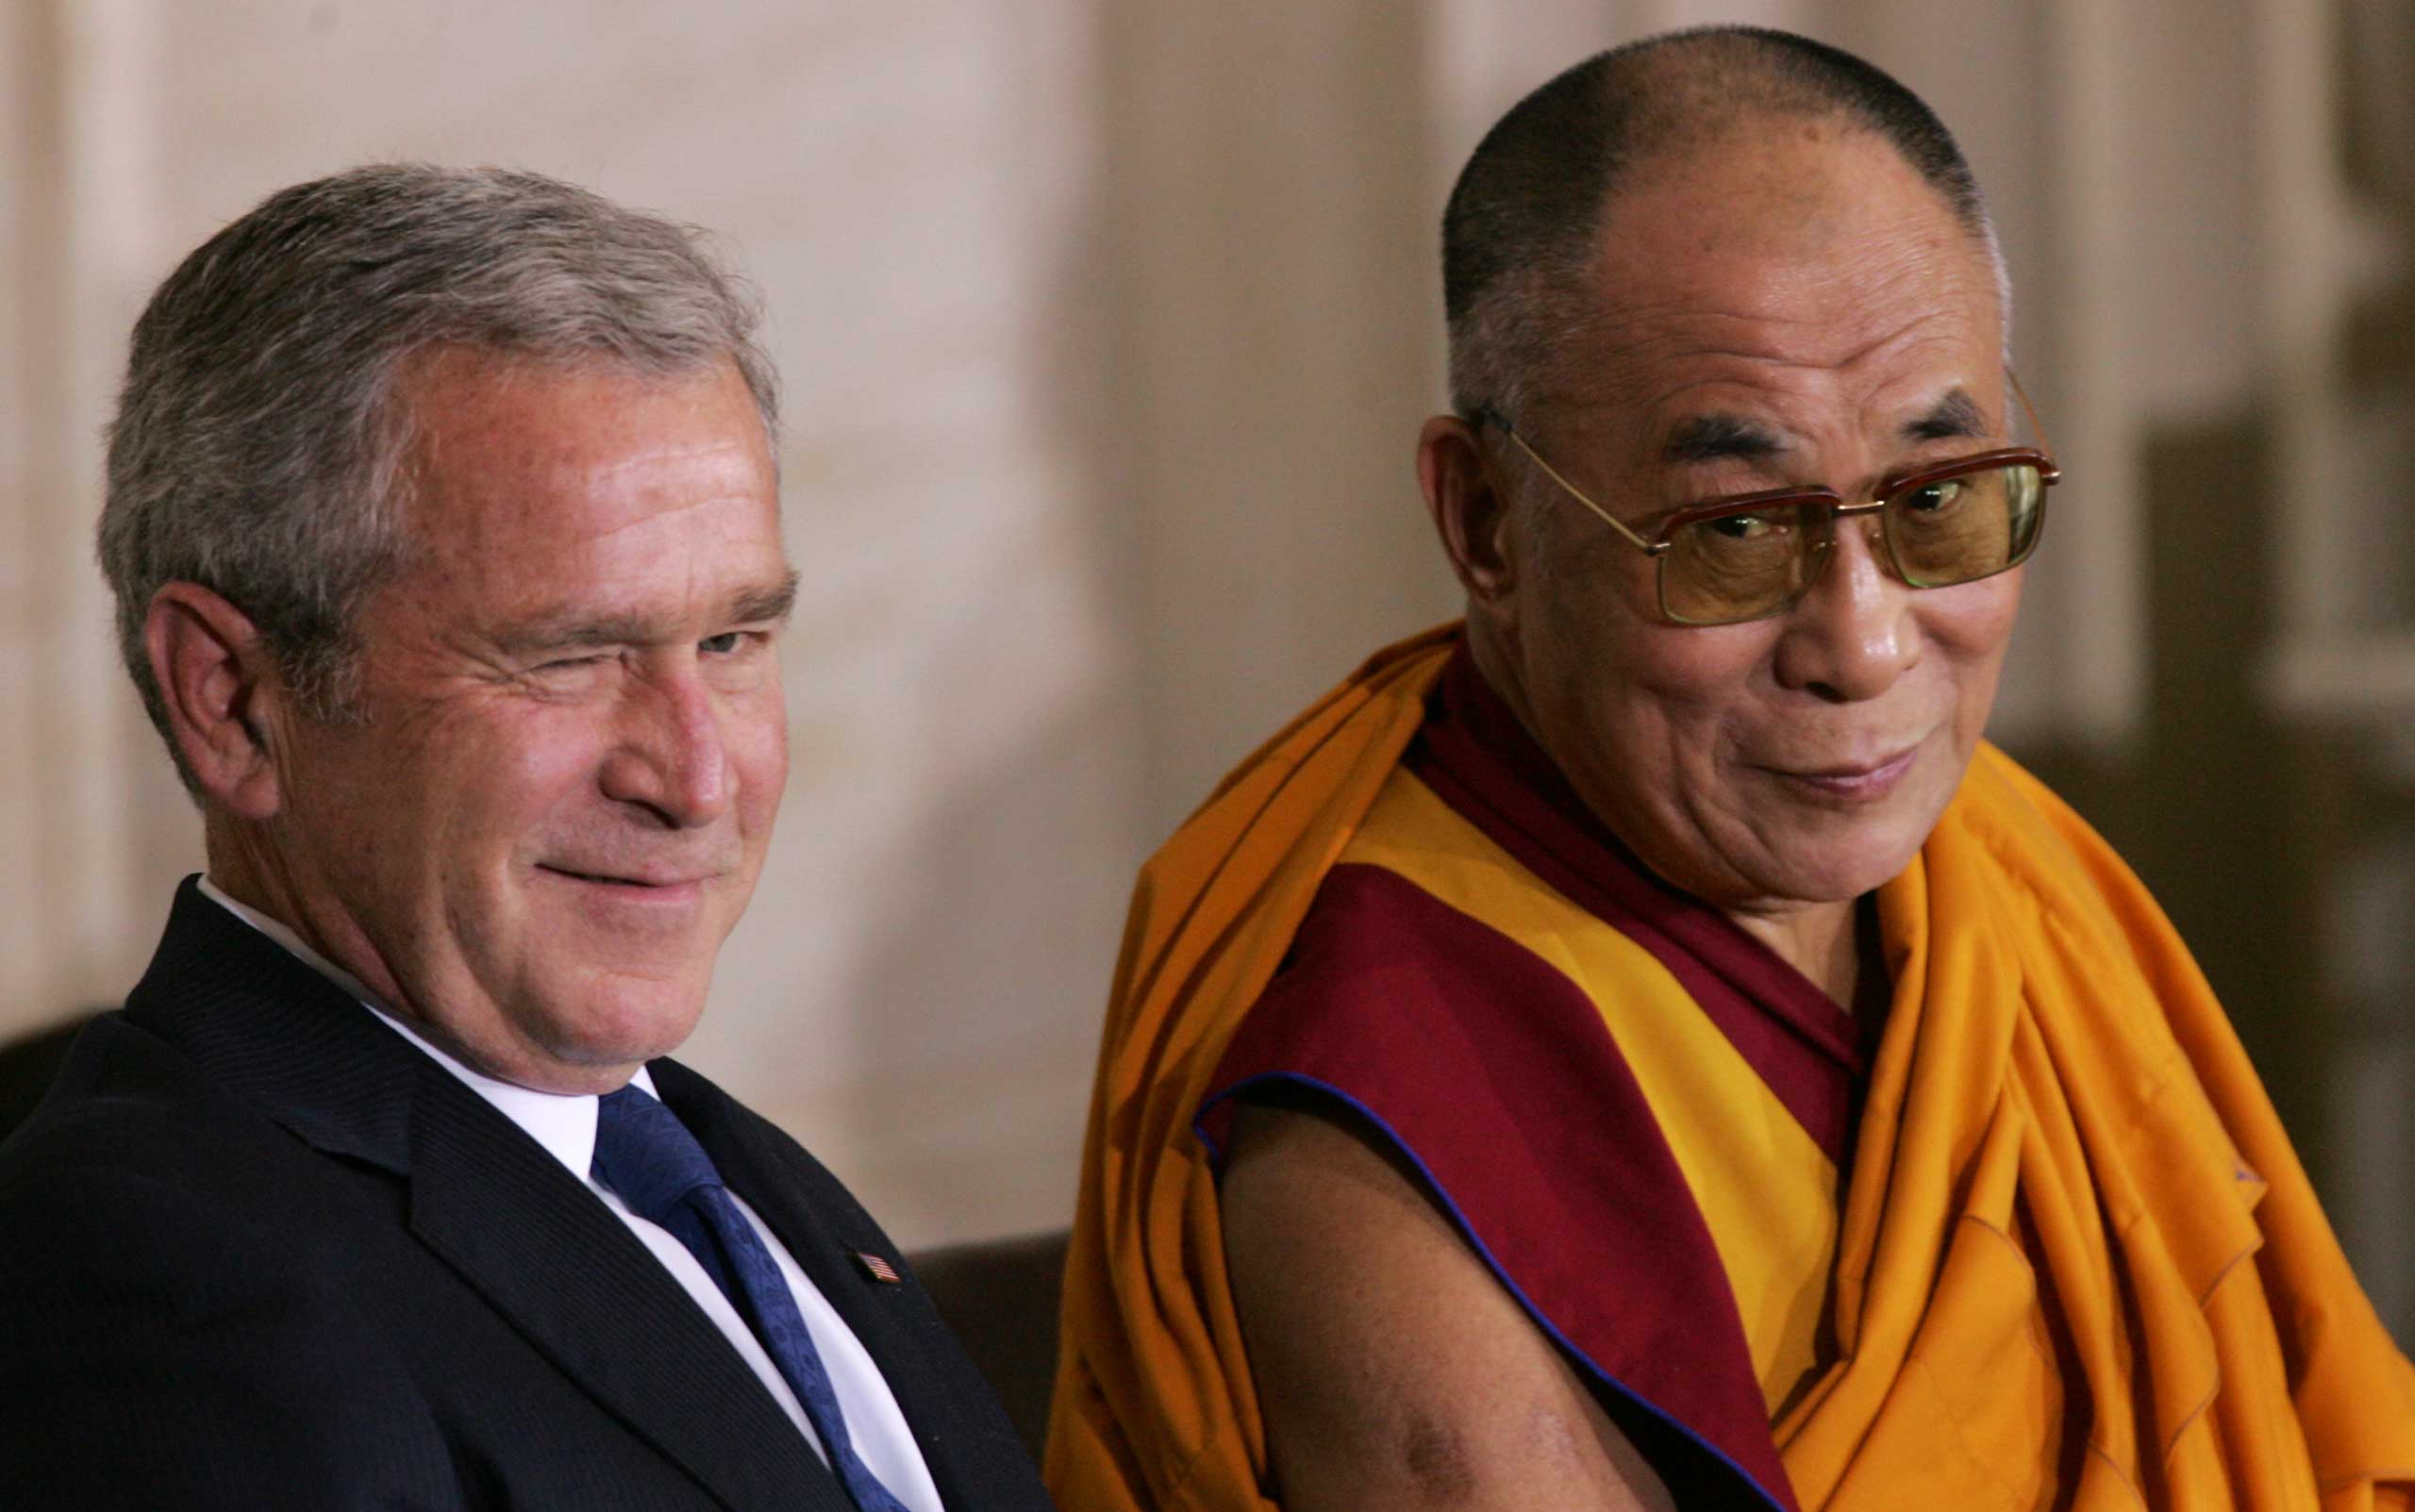 President George W. Bush winks while he sits with the Dalai Lama during a ceremony to present him with the Congressional Gold Medal in Washington, D.C., in October 2007.